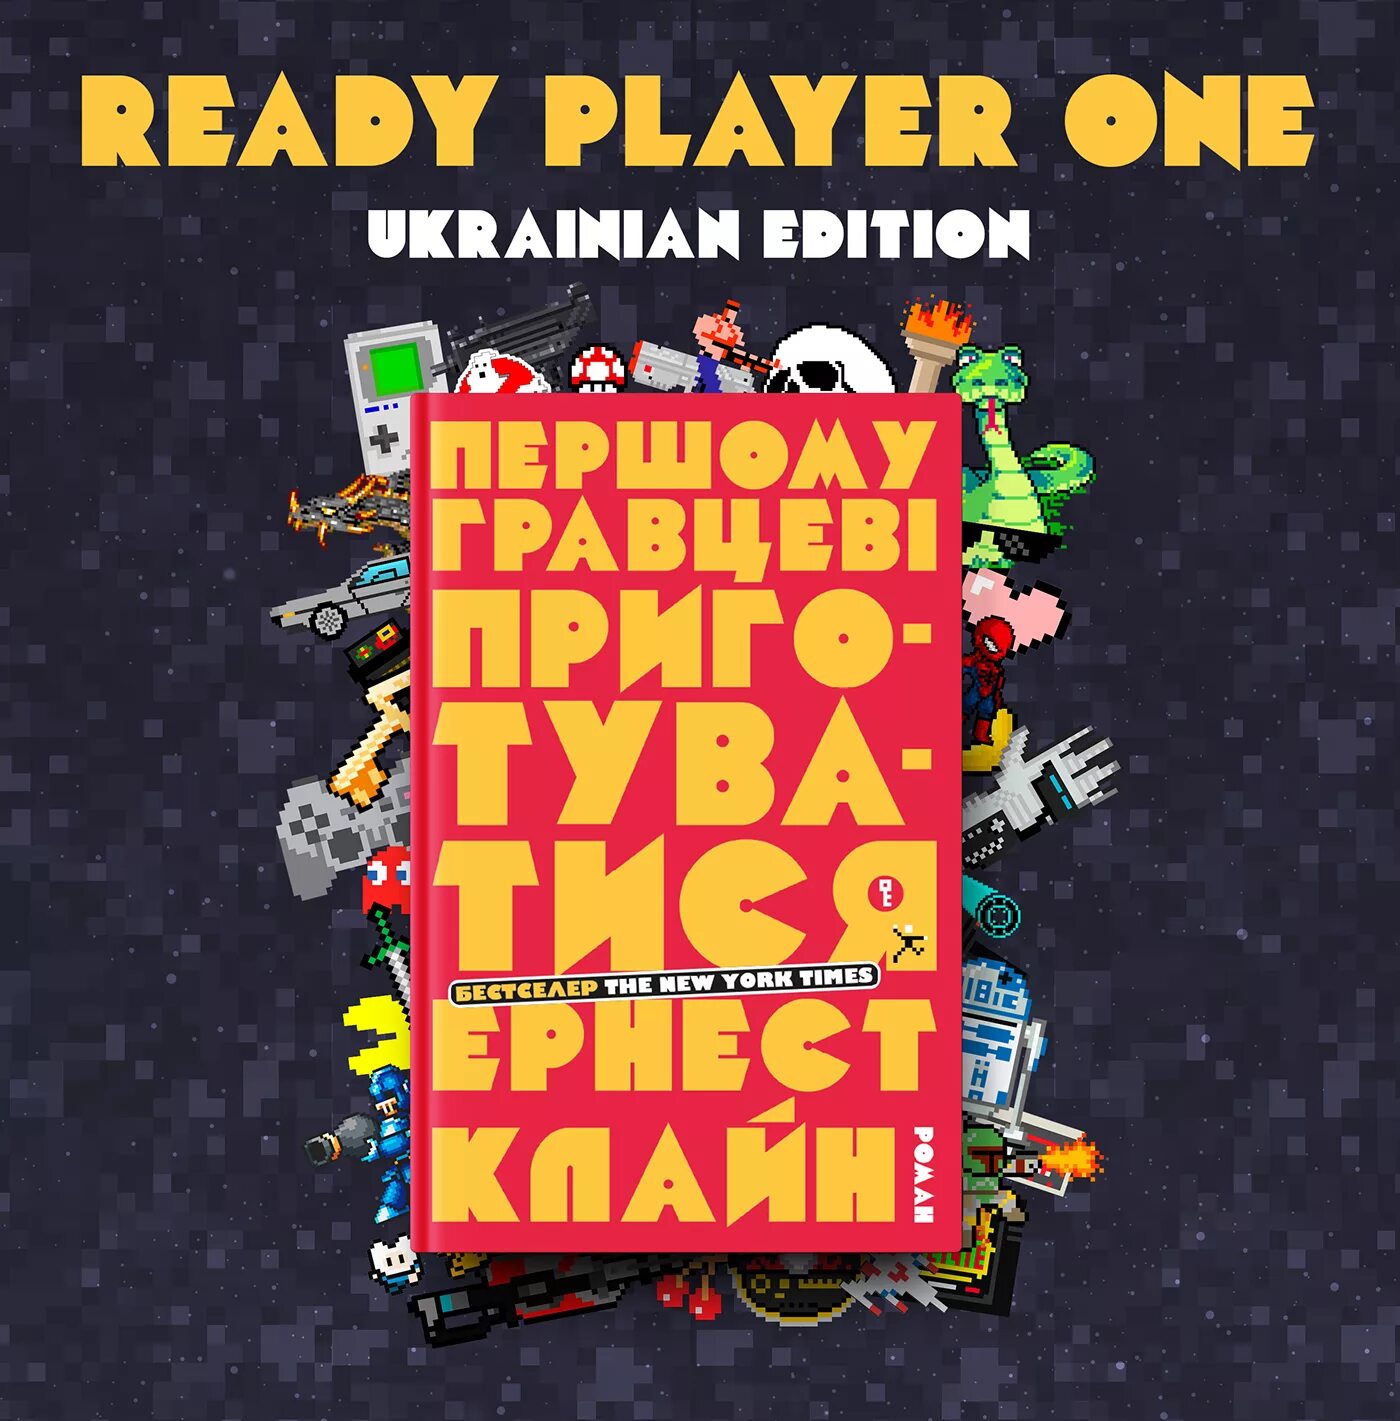 Ready Player one book. Ready Player one книга. Ready Player one обложка. Ready Player one book Cover. Player book